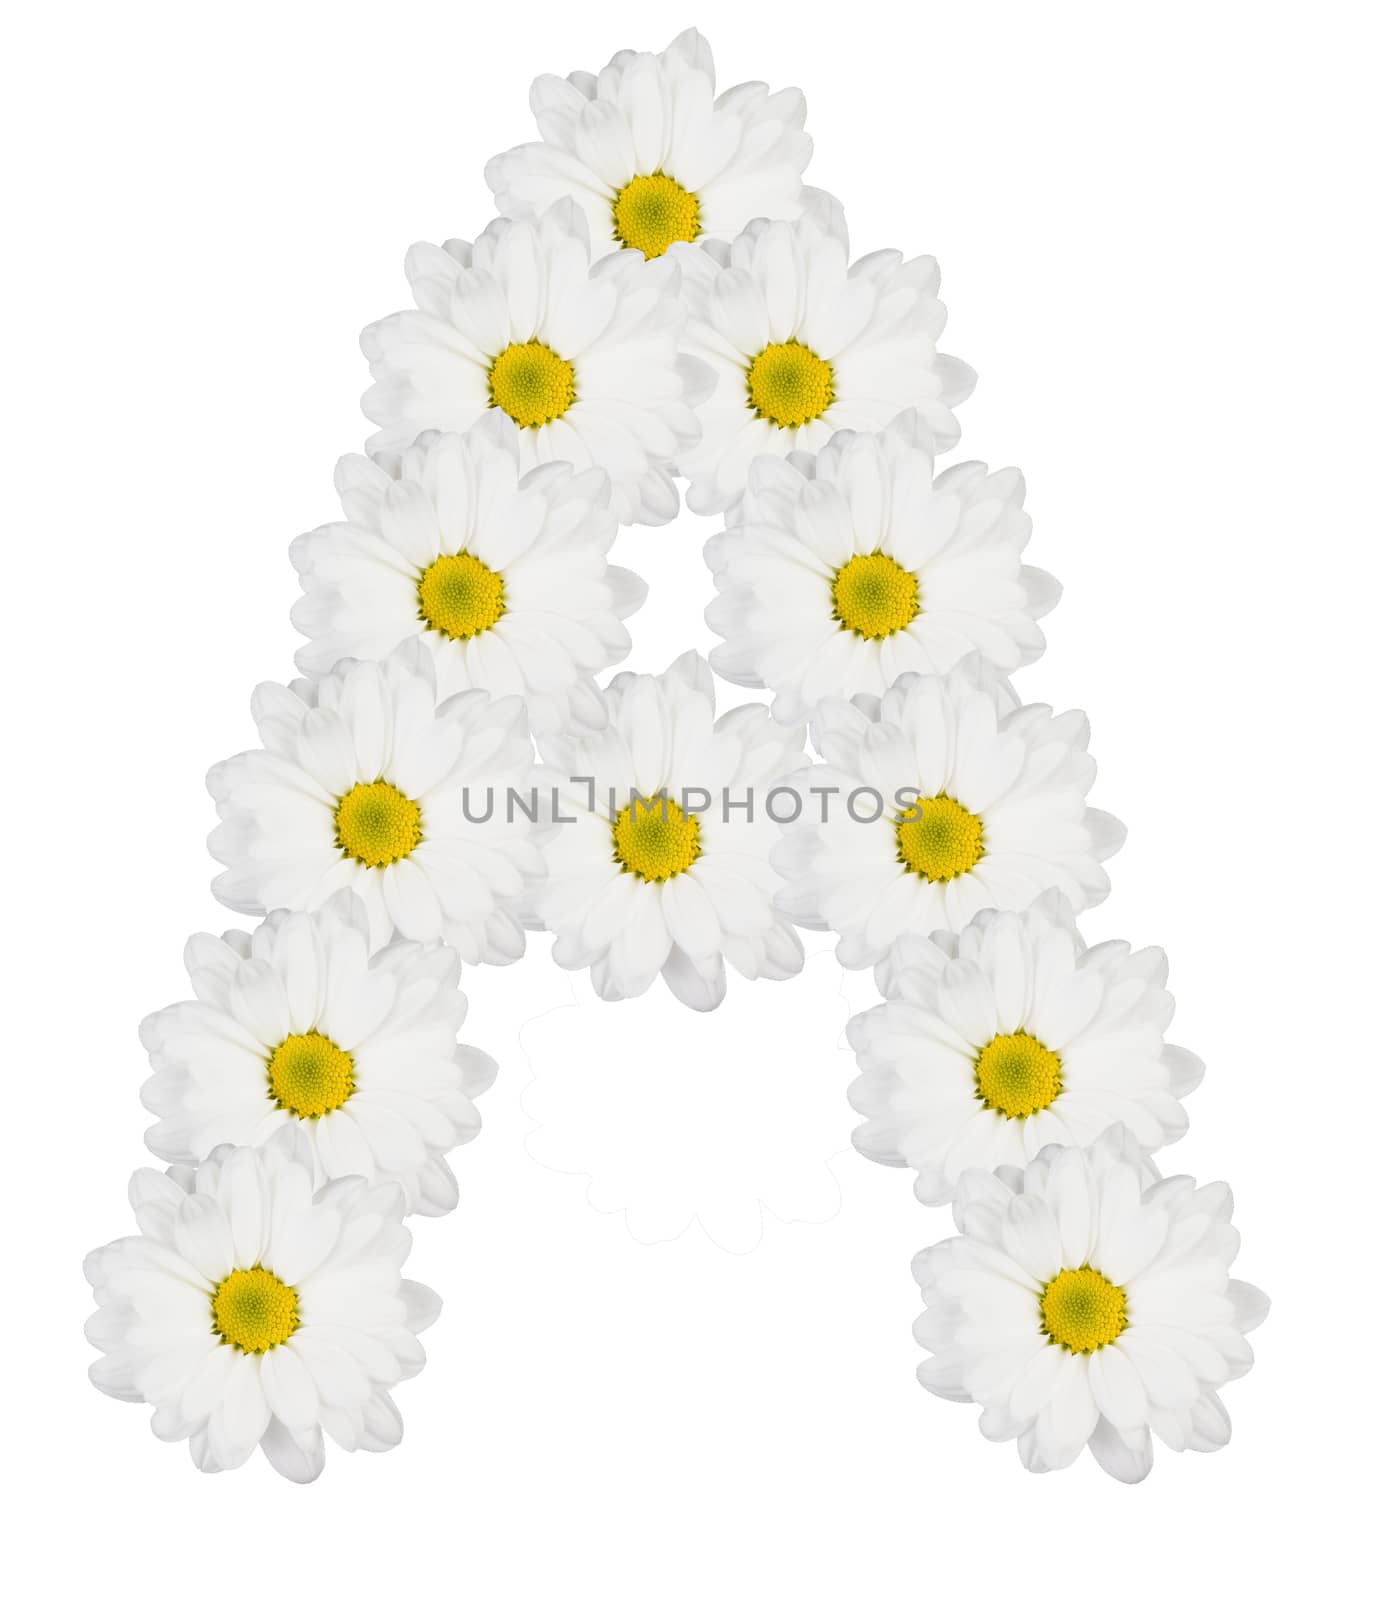 Letter A made from white flowers